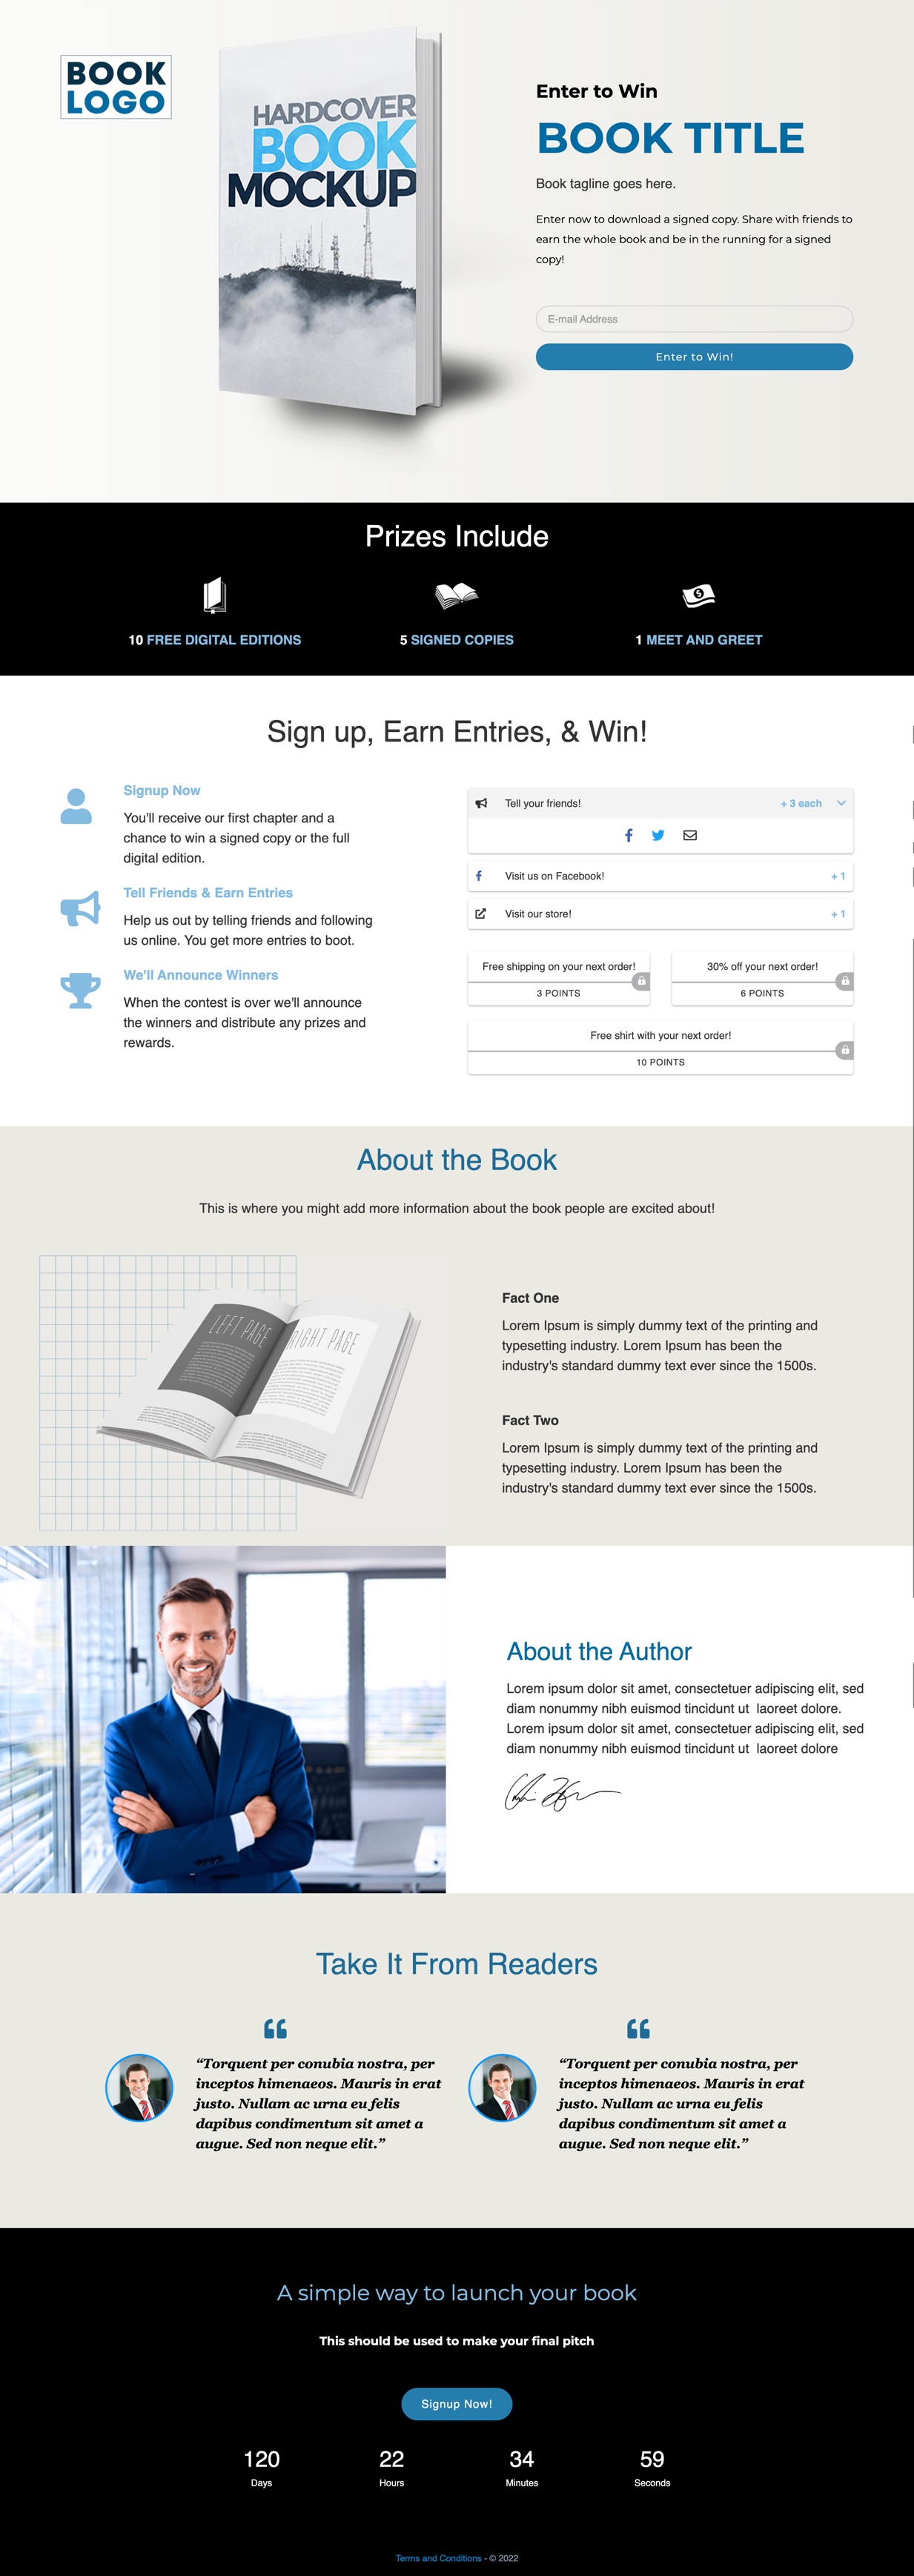 Landing Page Template: Enter to Win - Leaderboard Giveaway - Unlock Rewards: Book Launch Contest